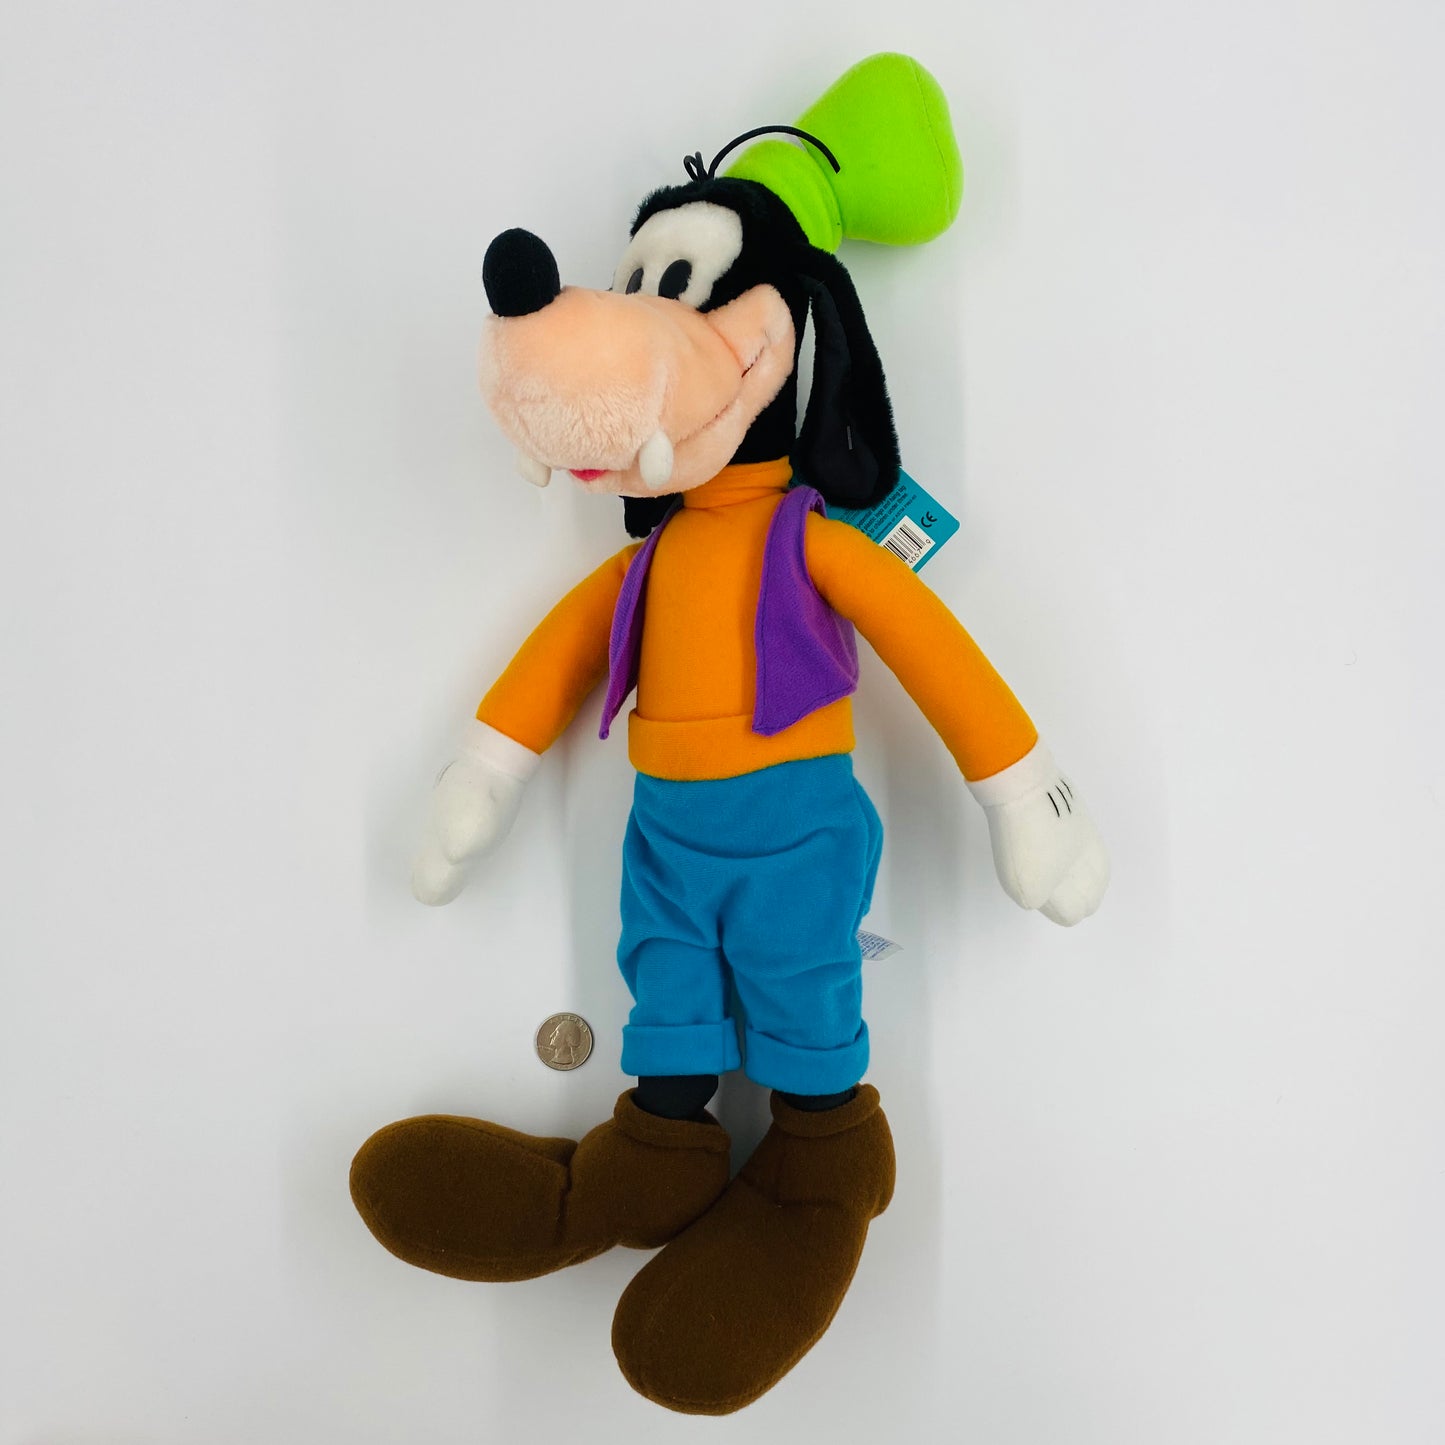 Goofy 20” plush (late 1990's) Applause – Mom and Pop Culture 